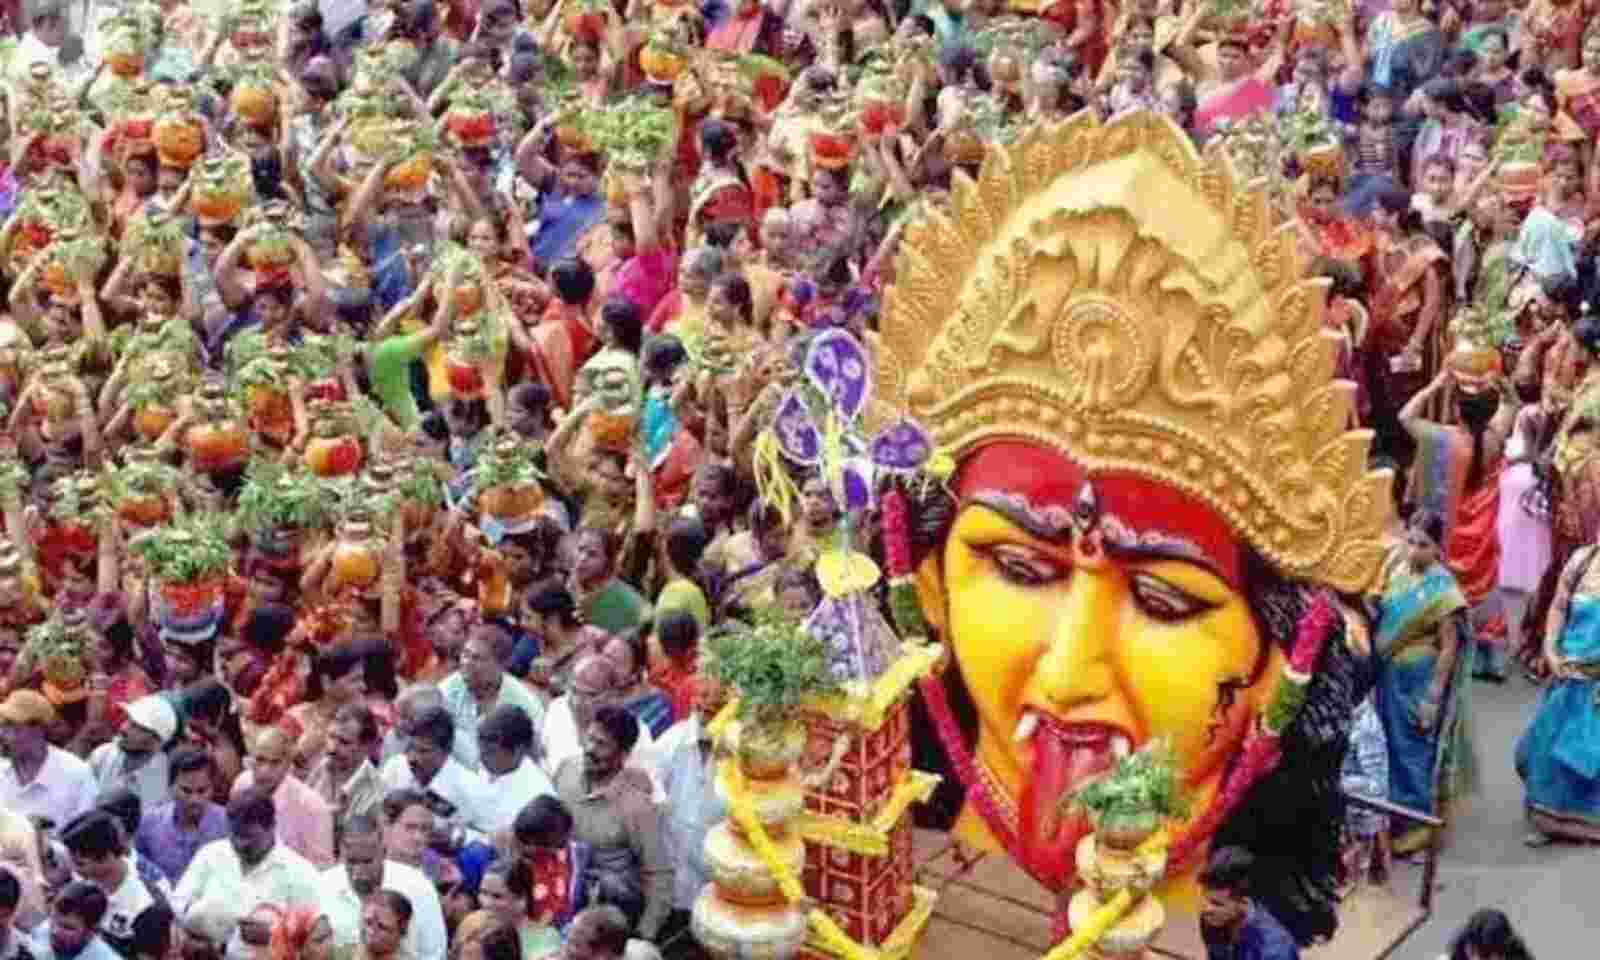 Telangana: Bonalu festival begins with much fervour in Hyderabad today